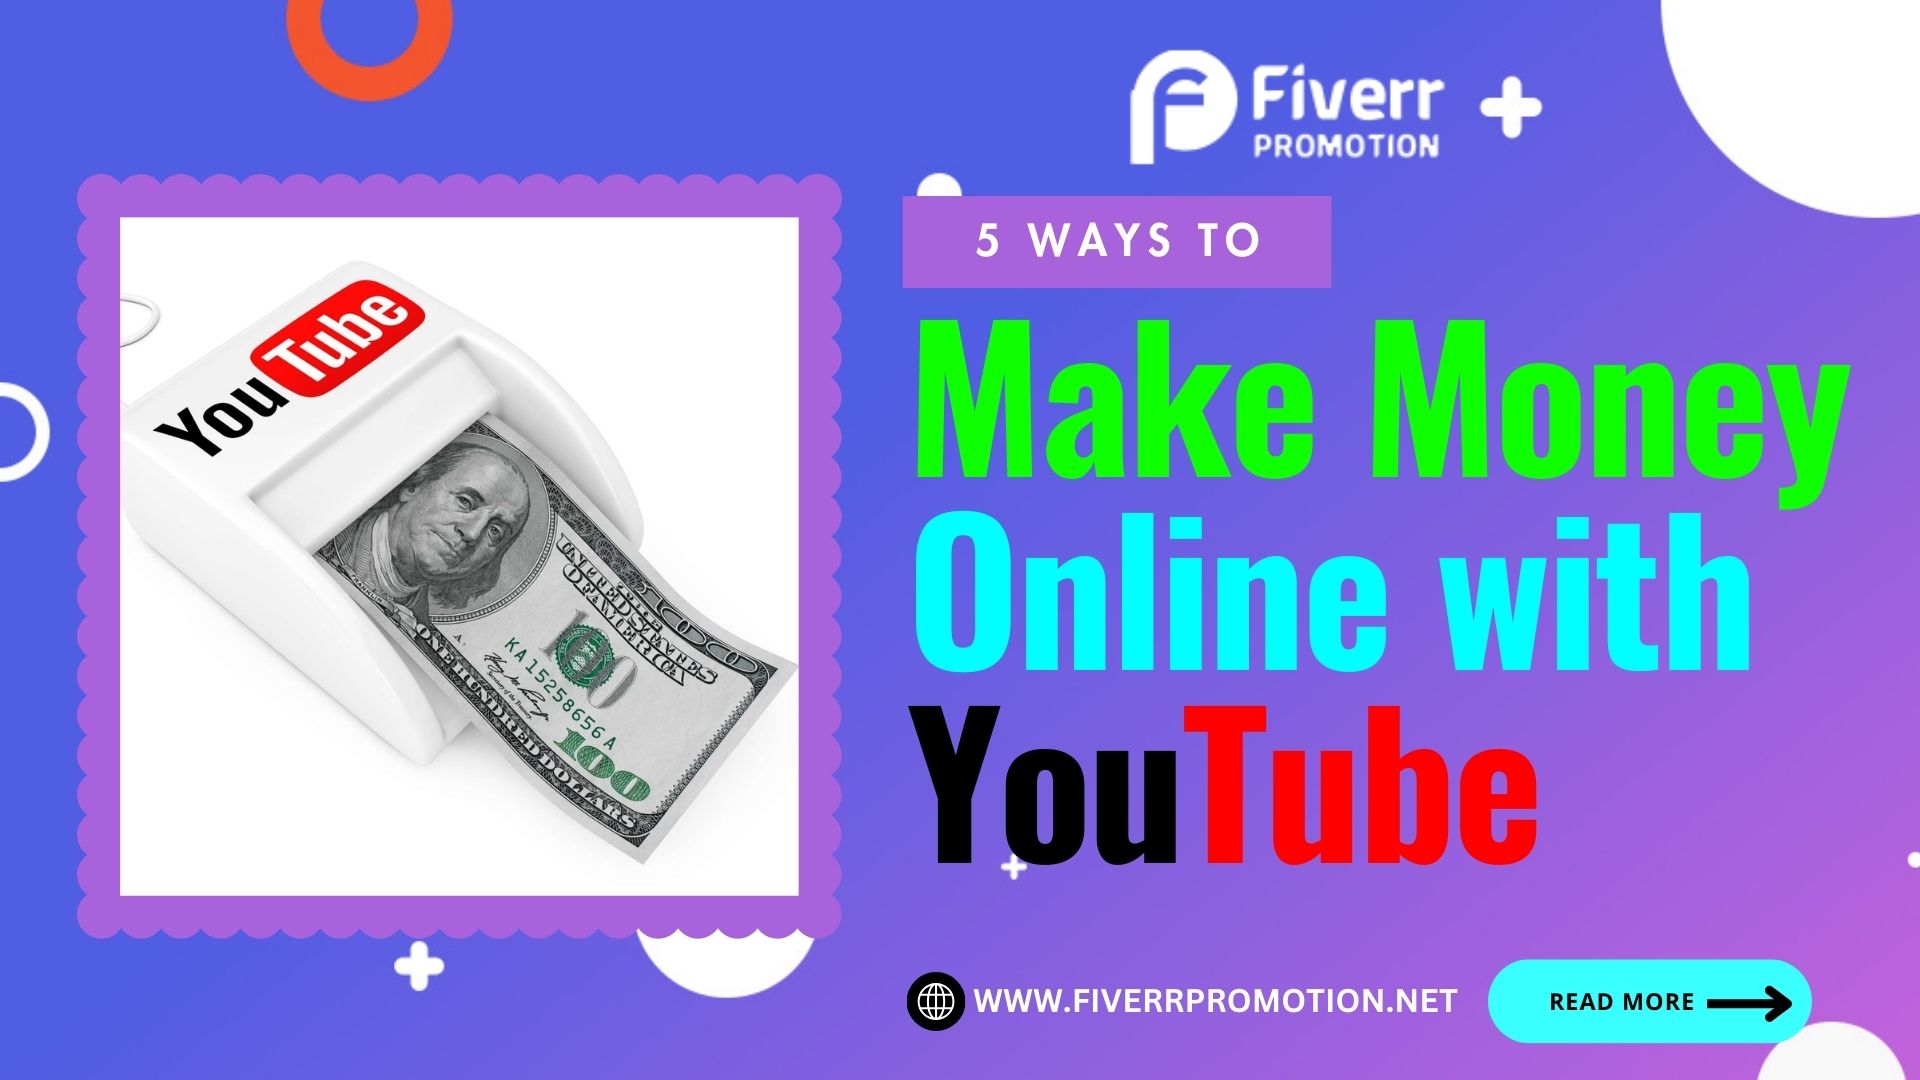 5 Ways to Make Money Online with YouTube